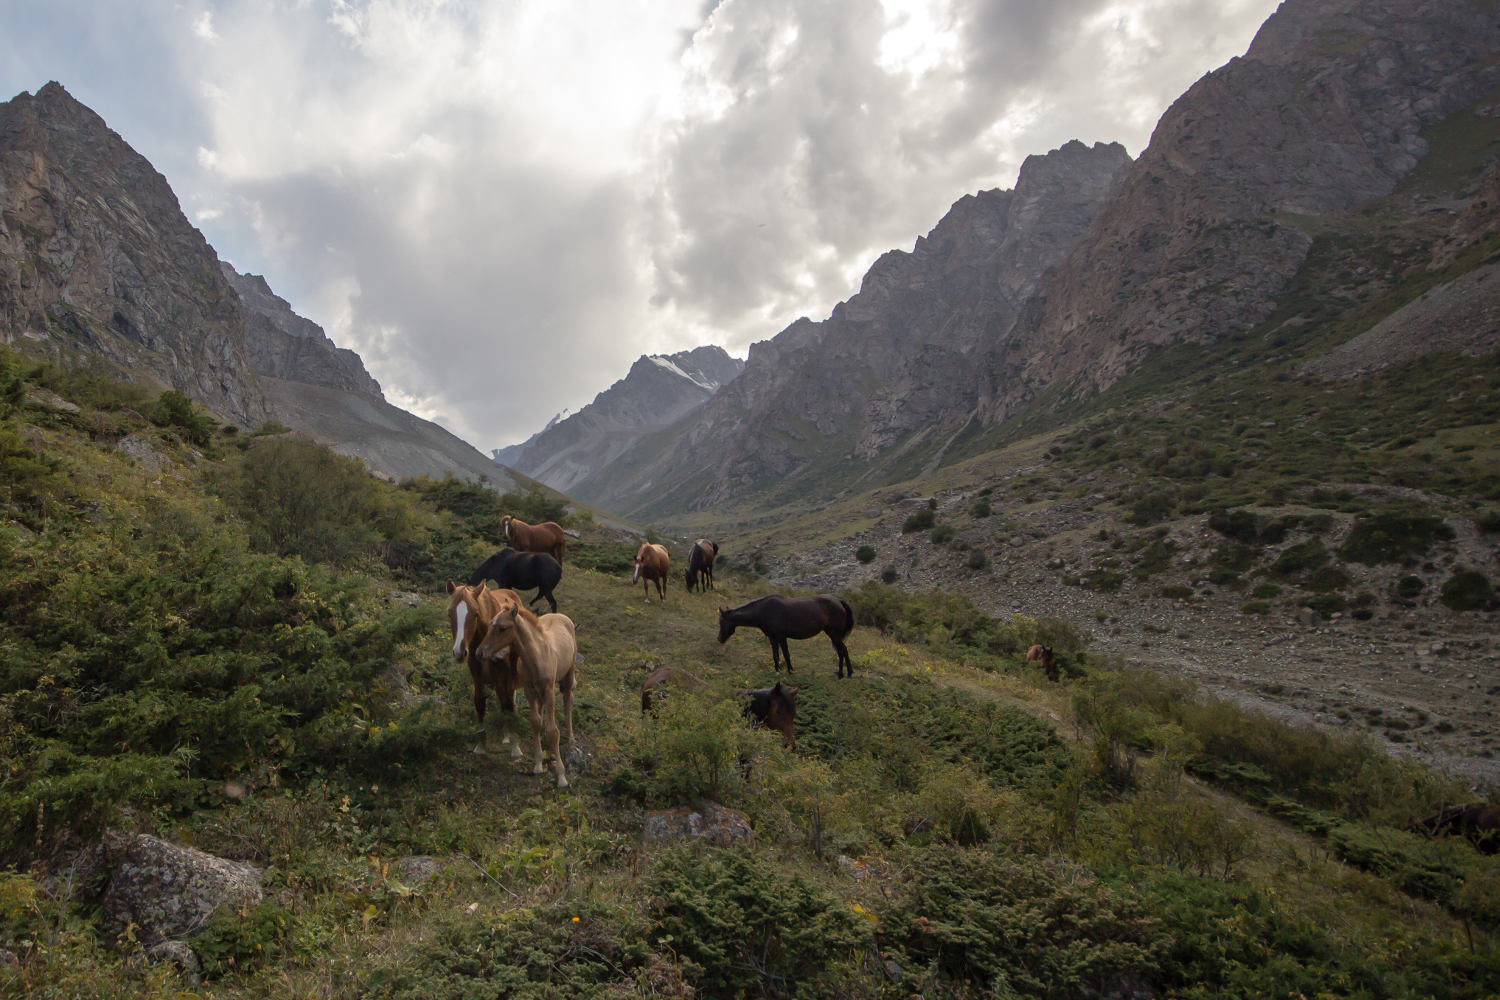 Spring is foaling season in Issyk-Ata. Image by Stephen Lioy / Lonely Planet